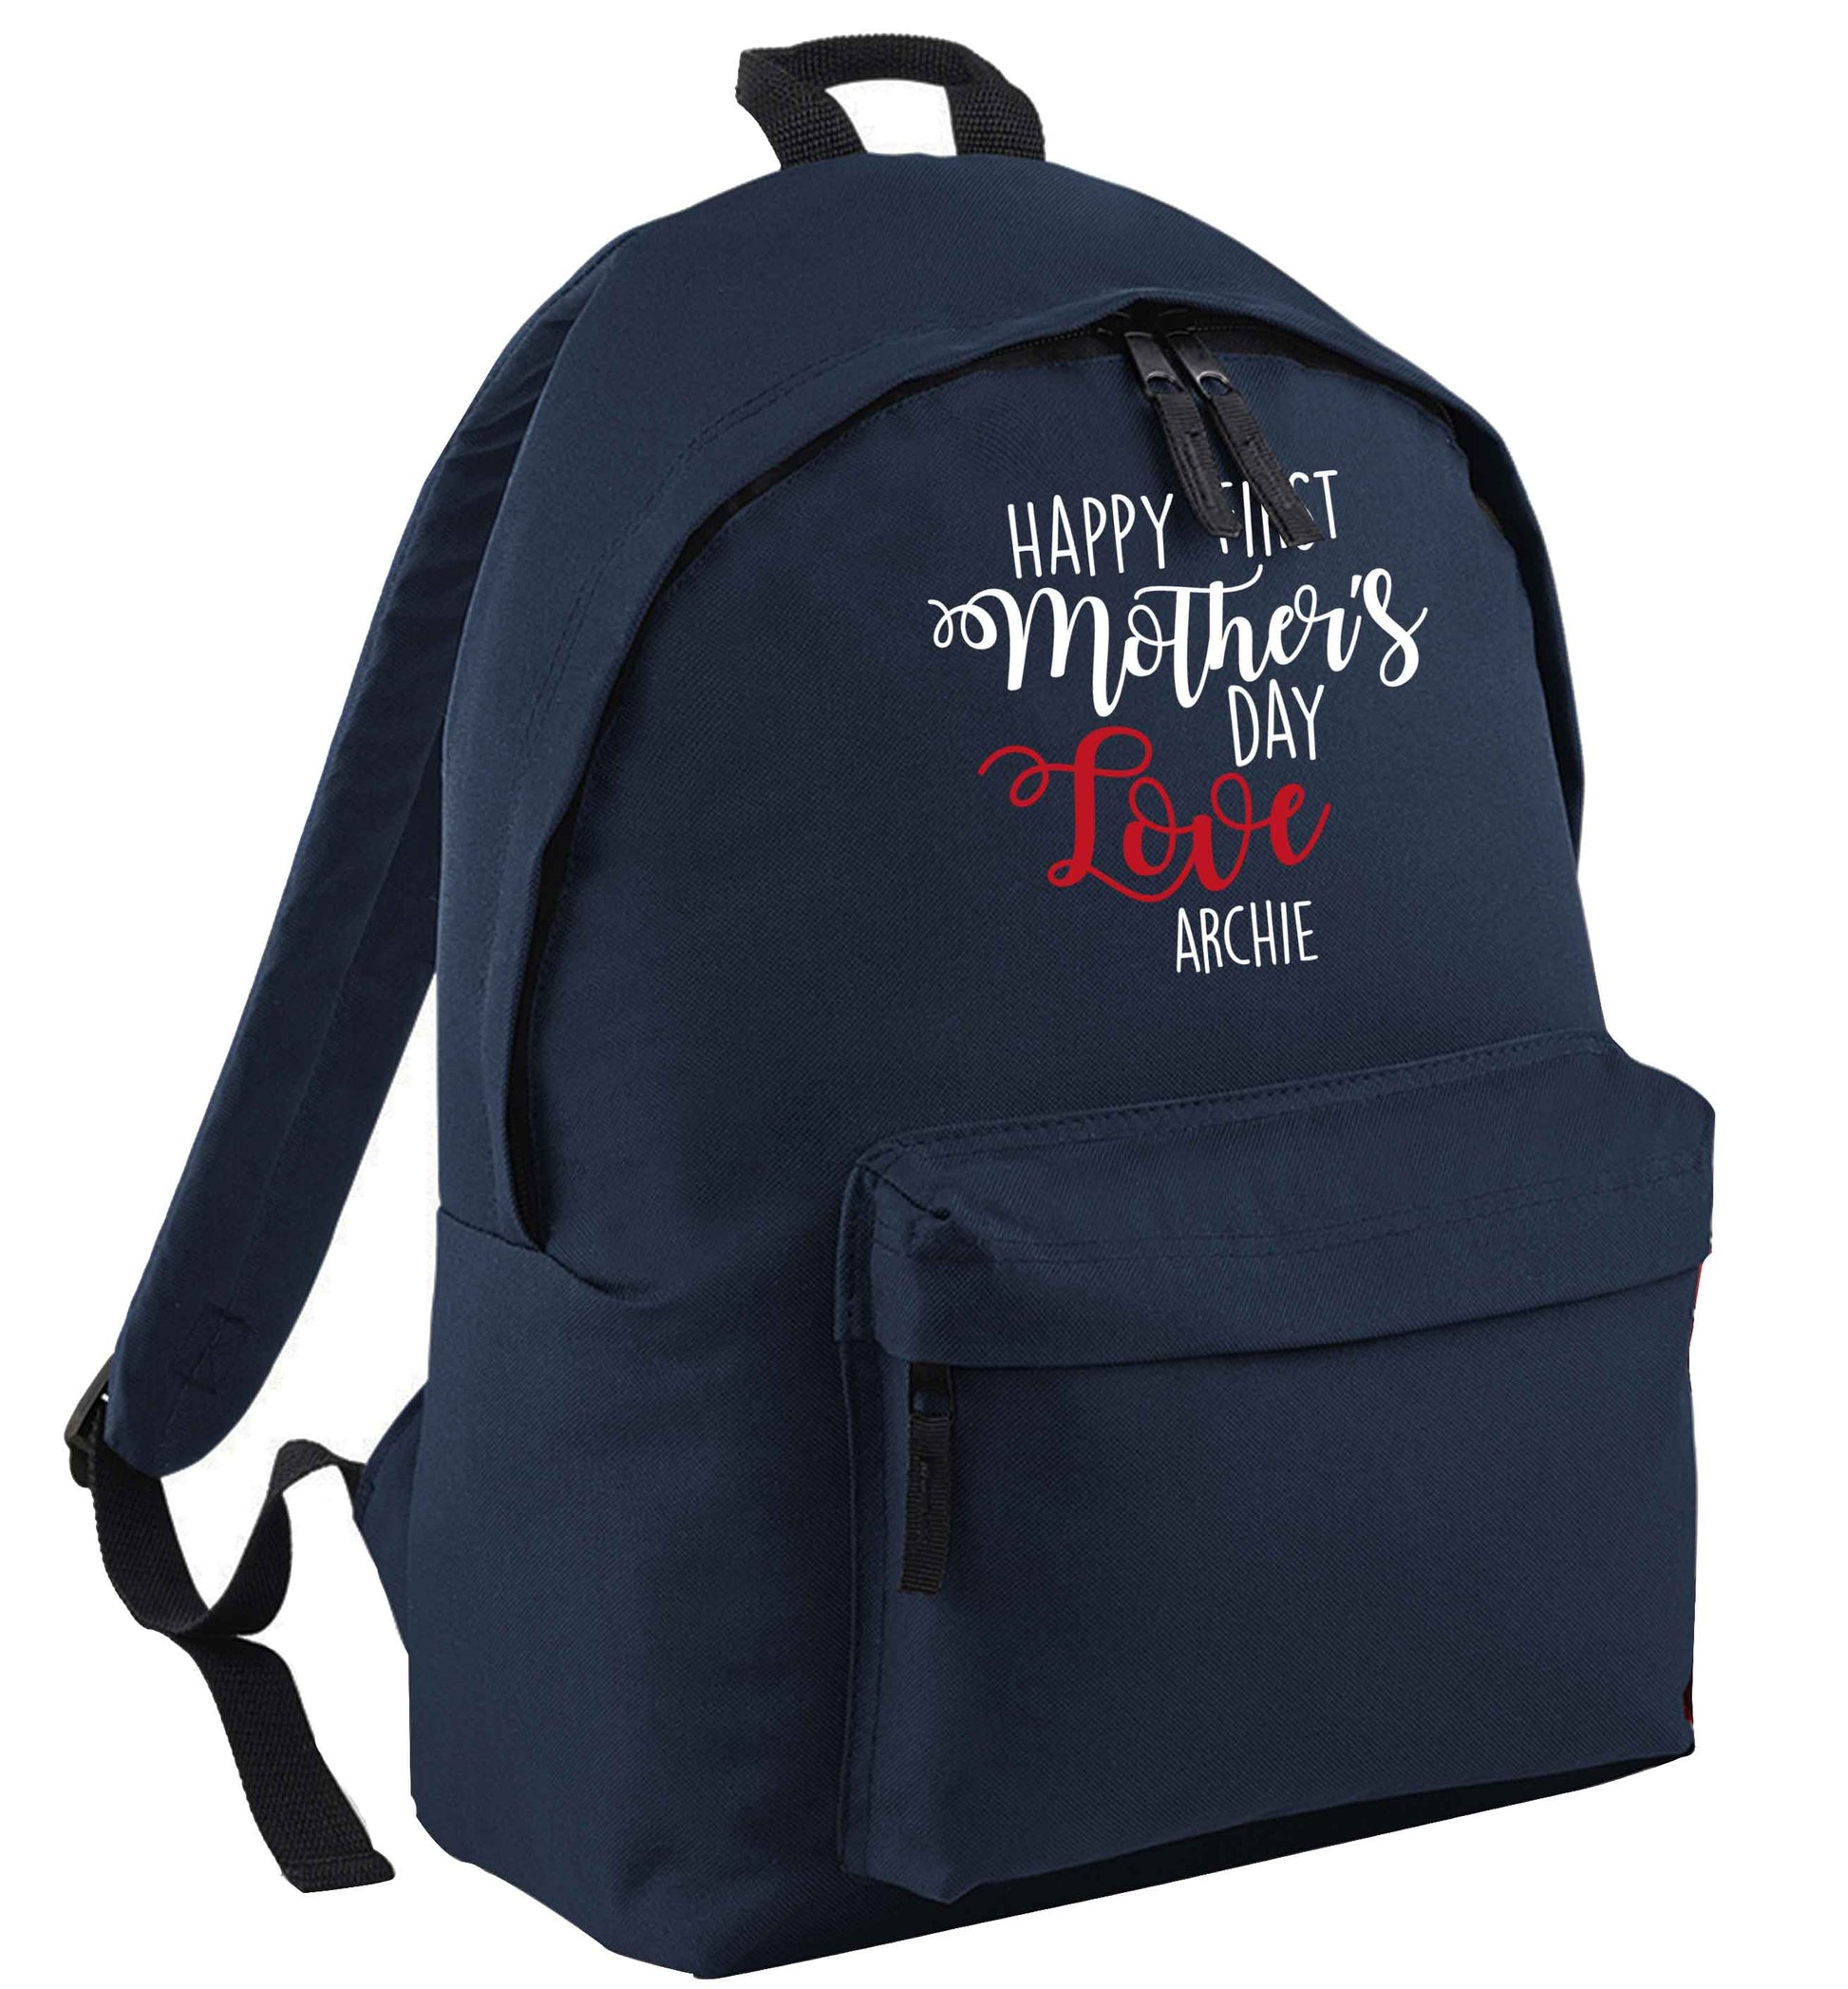 Mummy's first mother's day! navy adults backpack